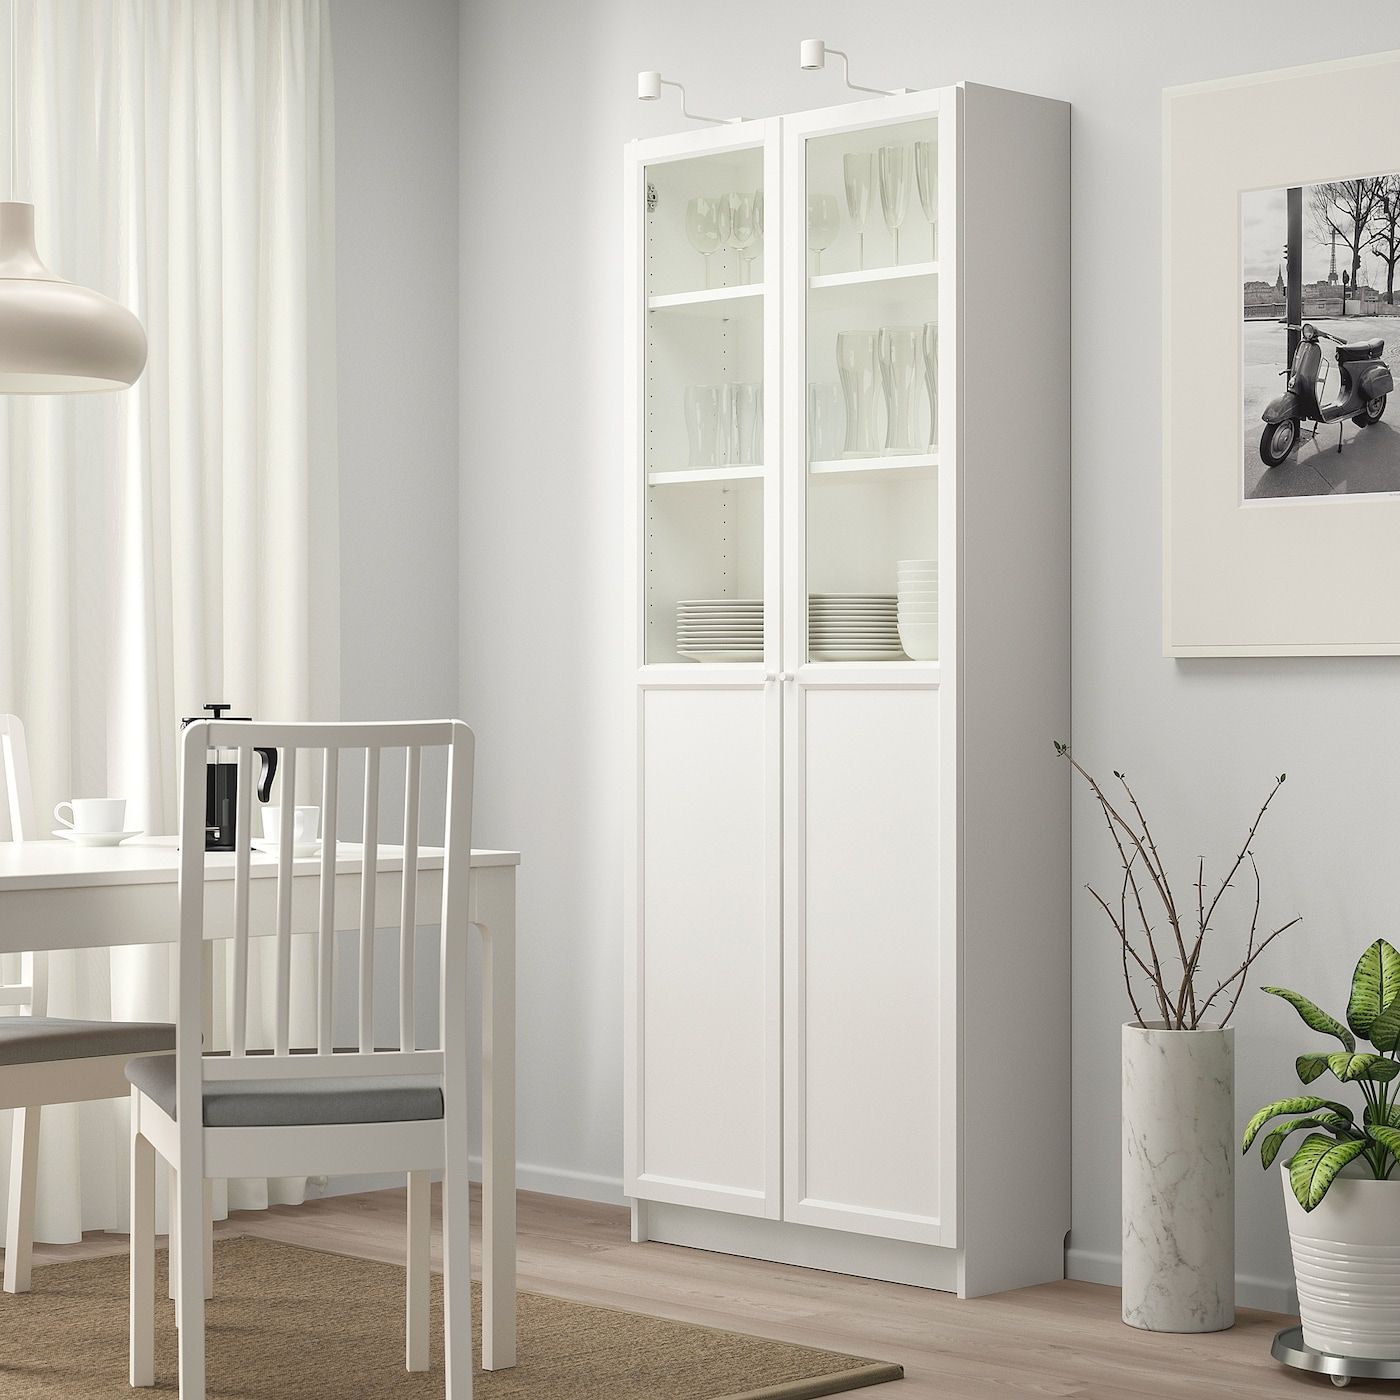 Billy / Oxberg Bookcase With Panel/glass Doors, White, 311/2x113/4x791/2" –  Ikea With Regard To Bookcases With Doors (View 13 of 15)